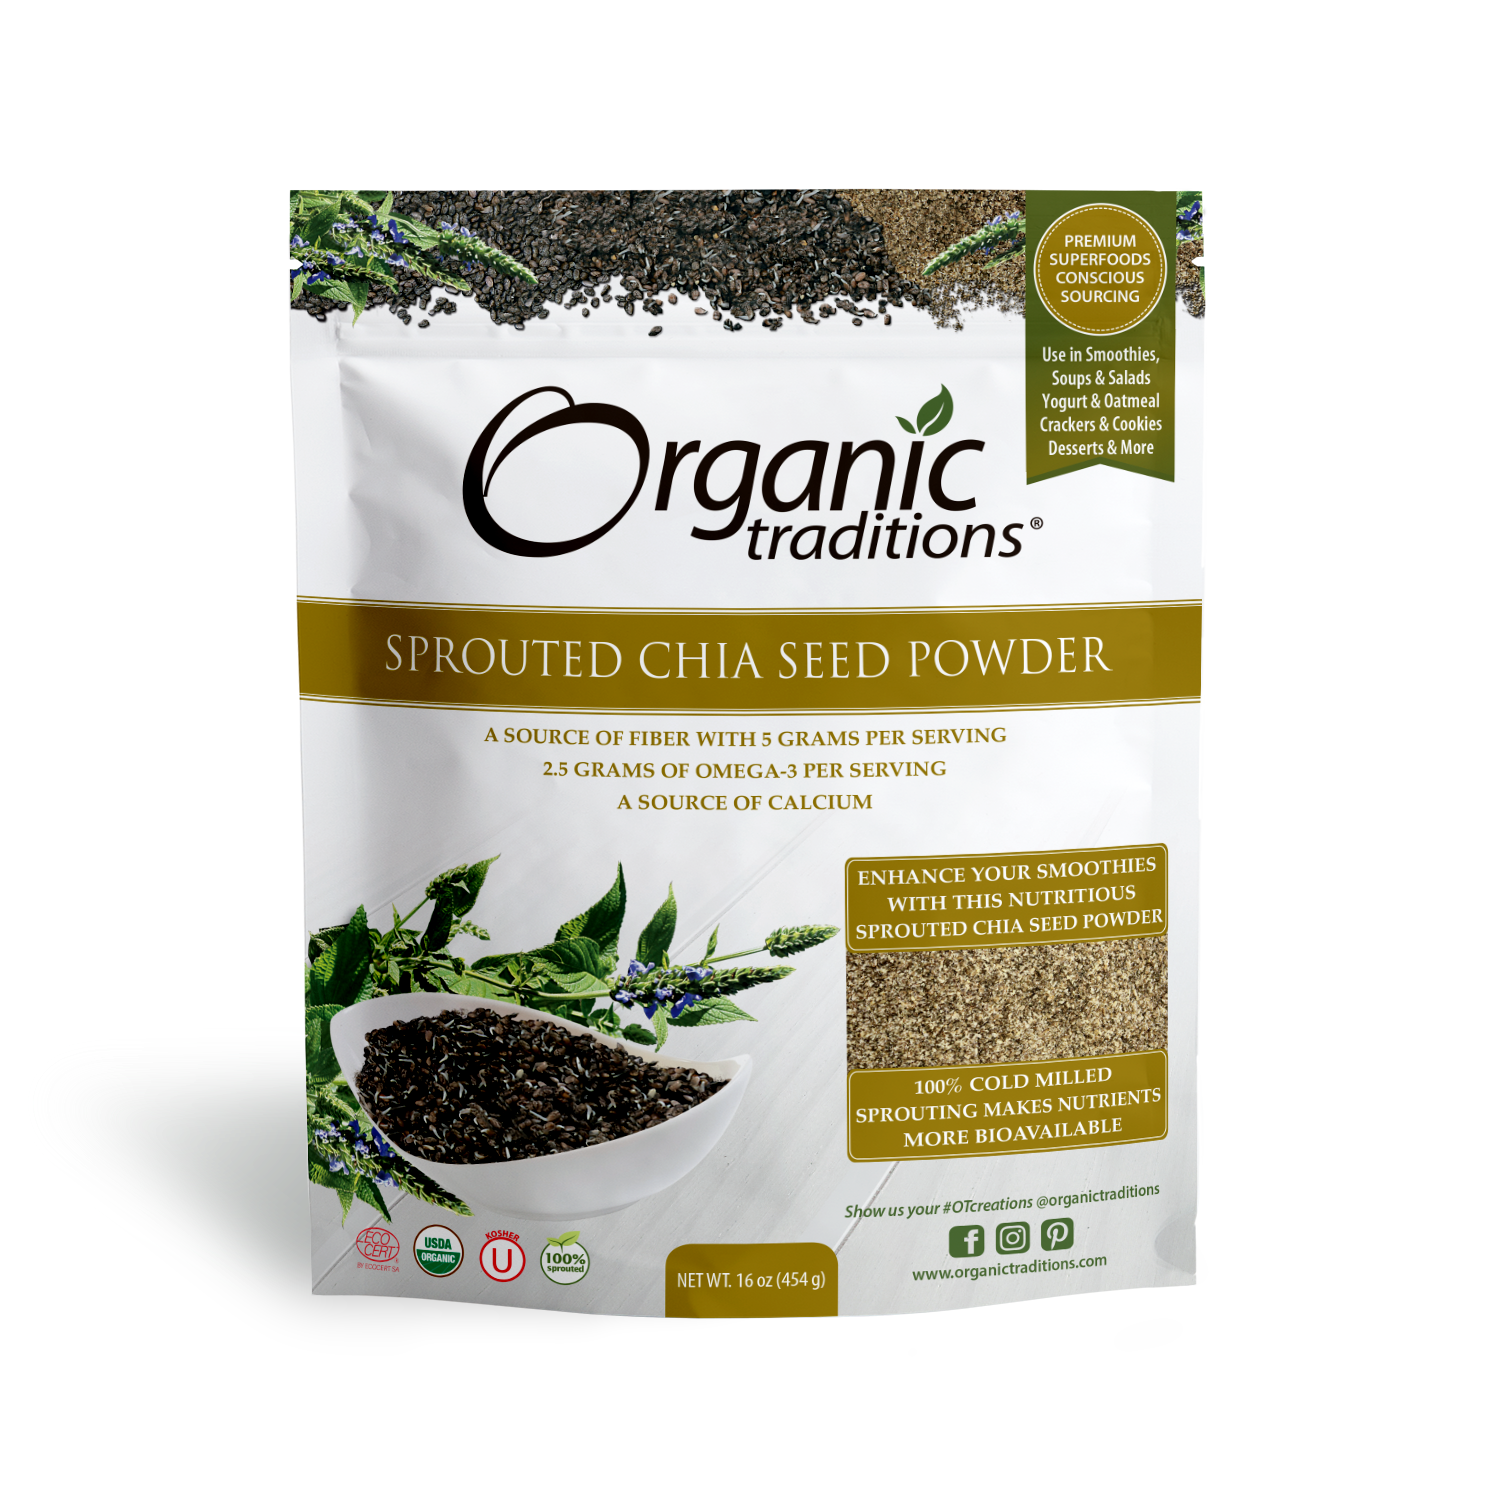 Sprouted Chia Seed Powder